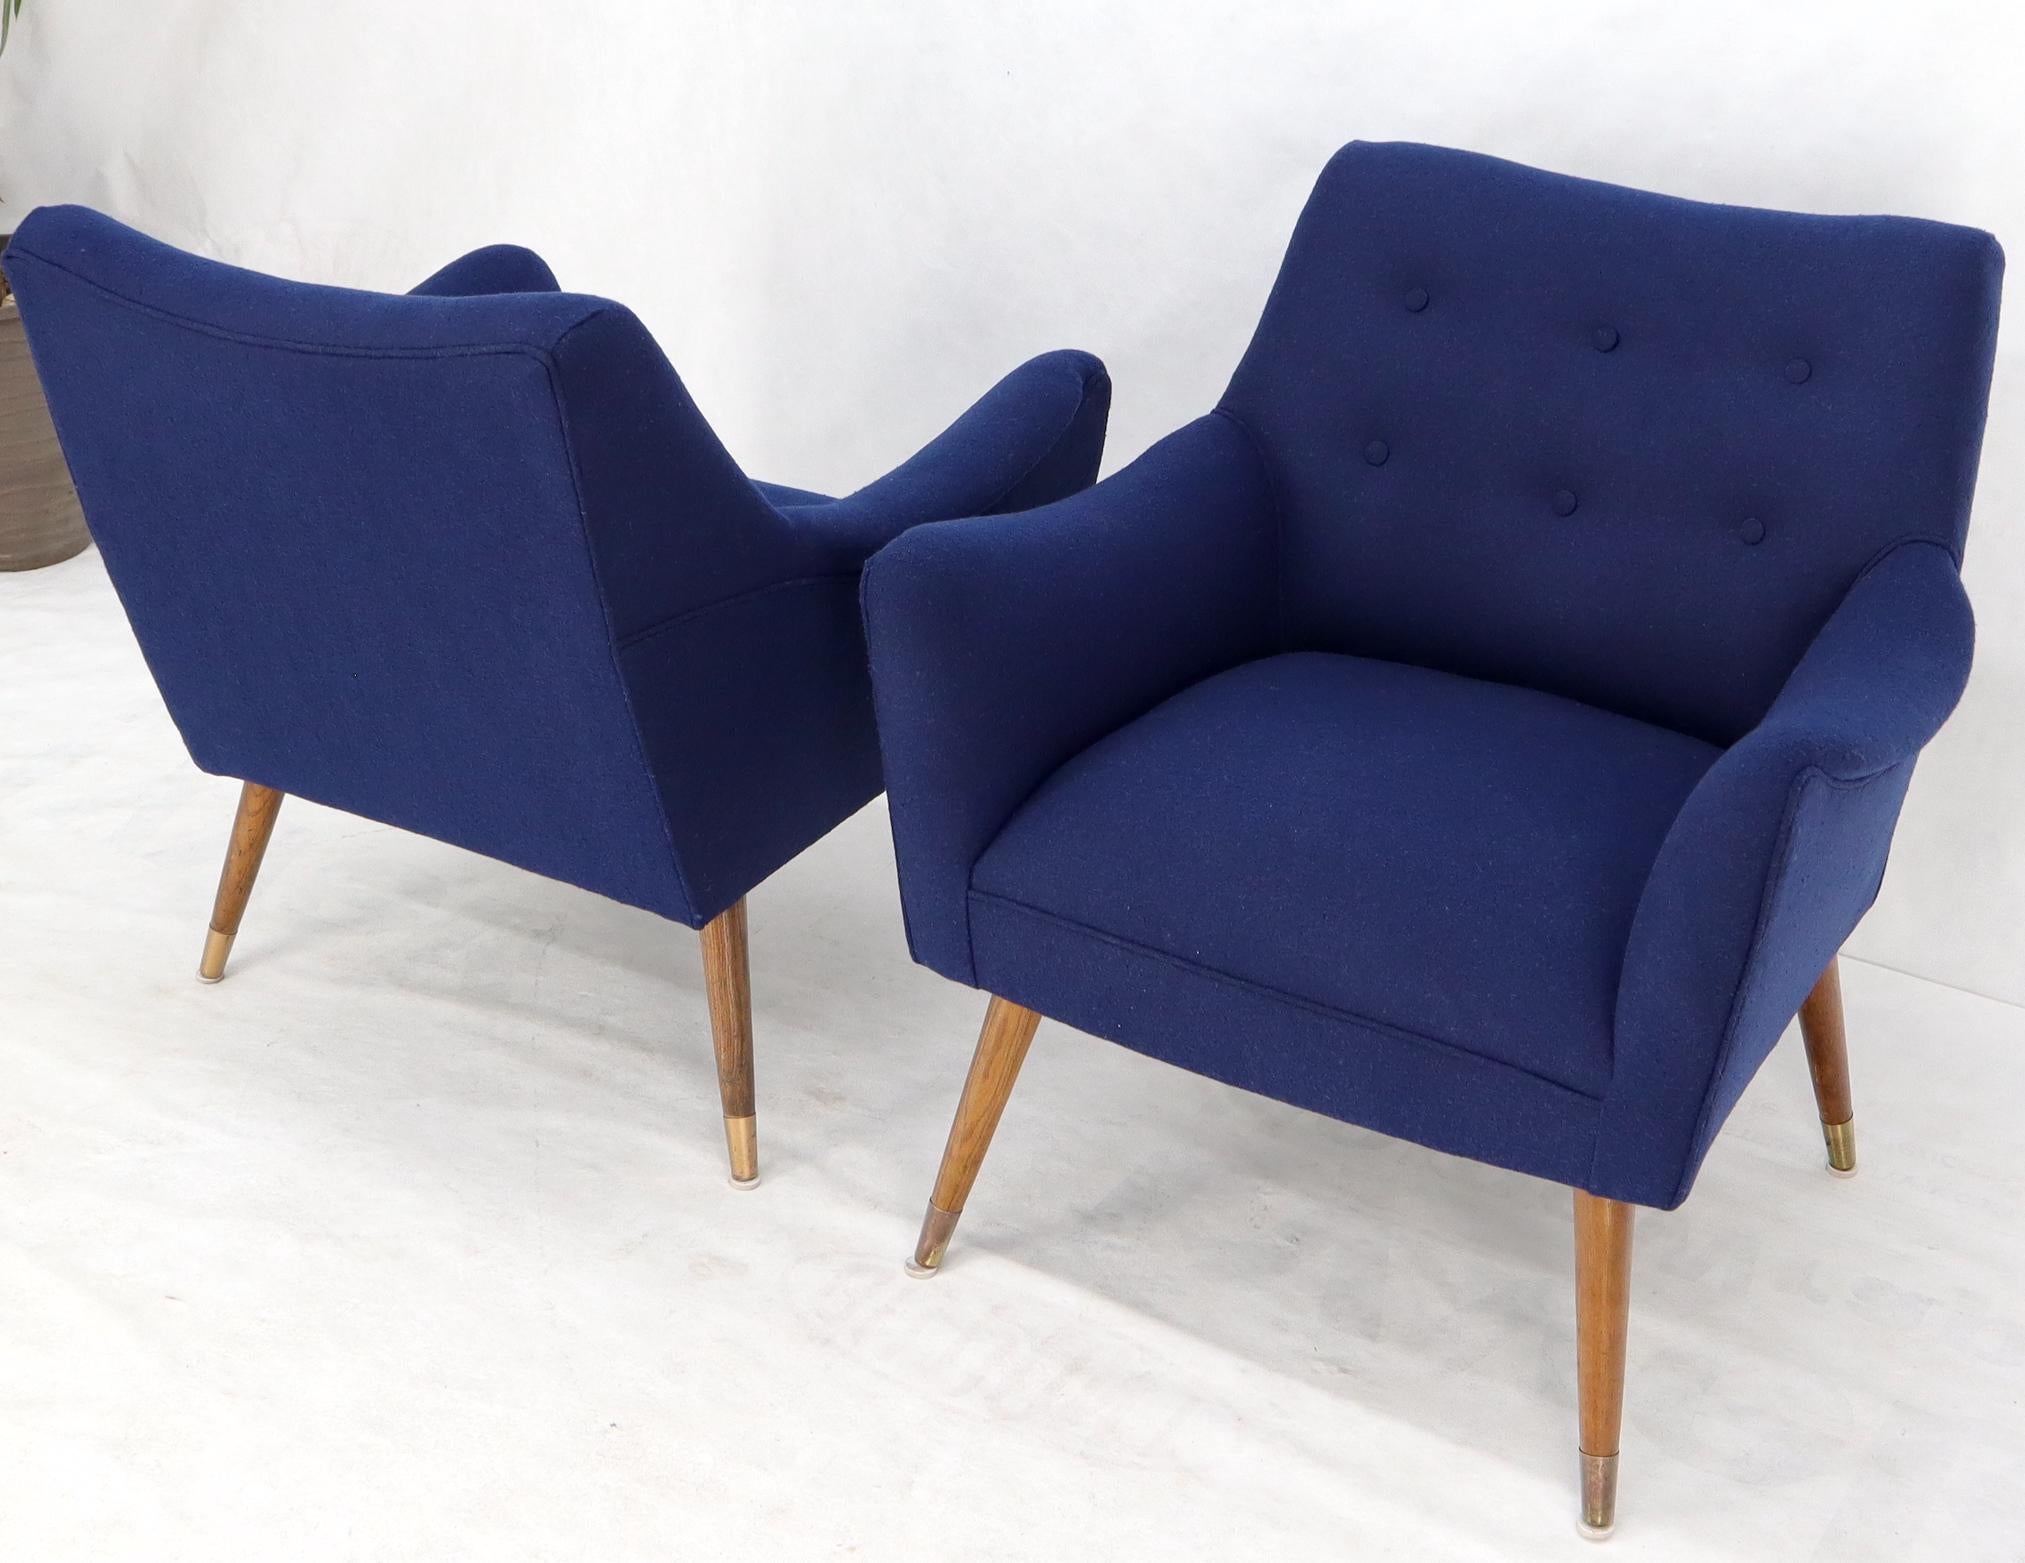 Pair of Mid-Century Modern new navy blue upholstery lounge chairs on tapered dowel legs.